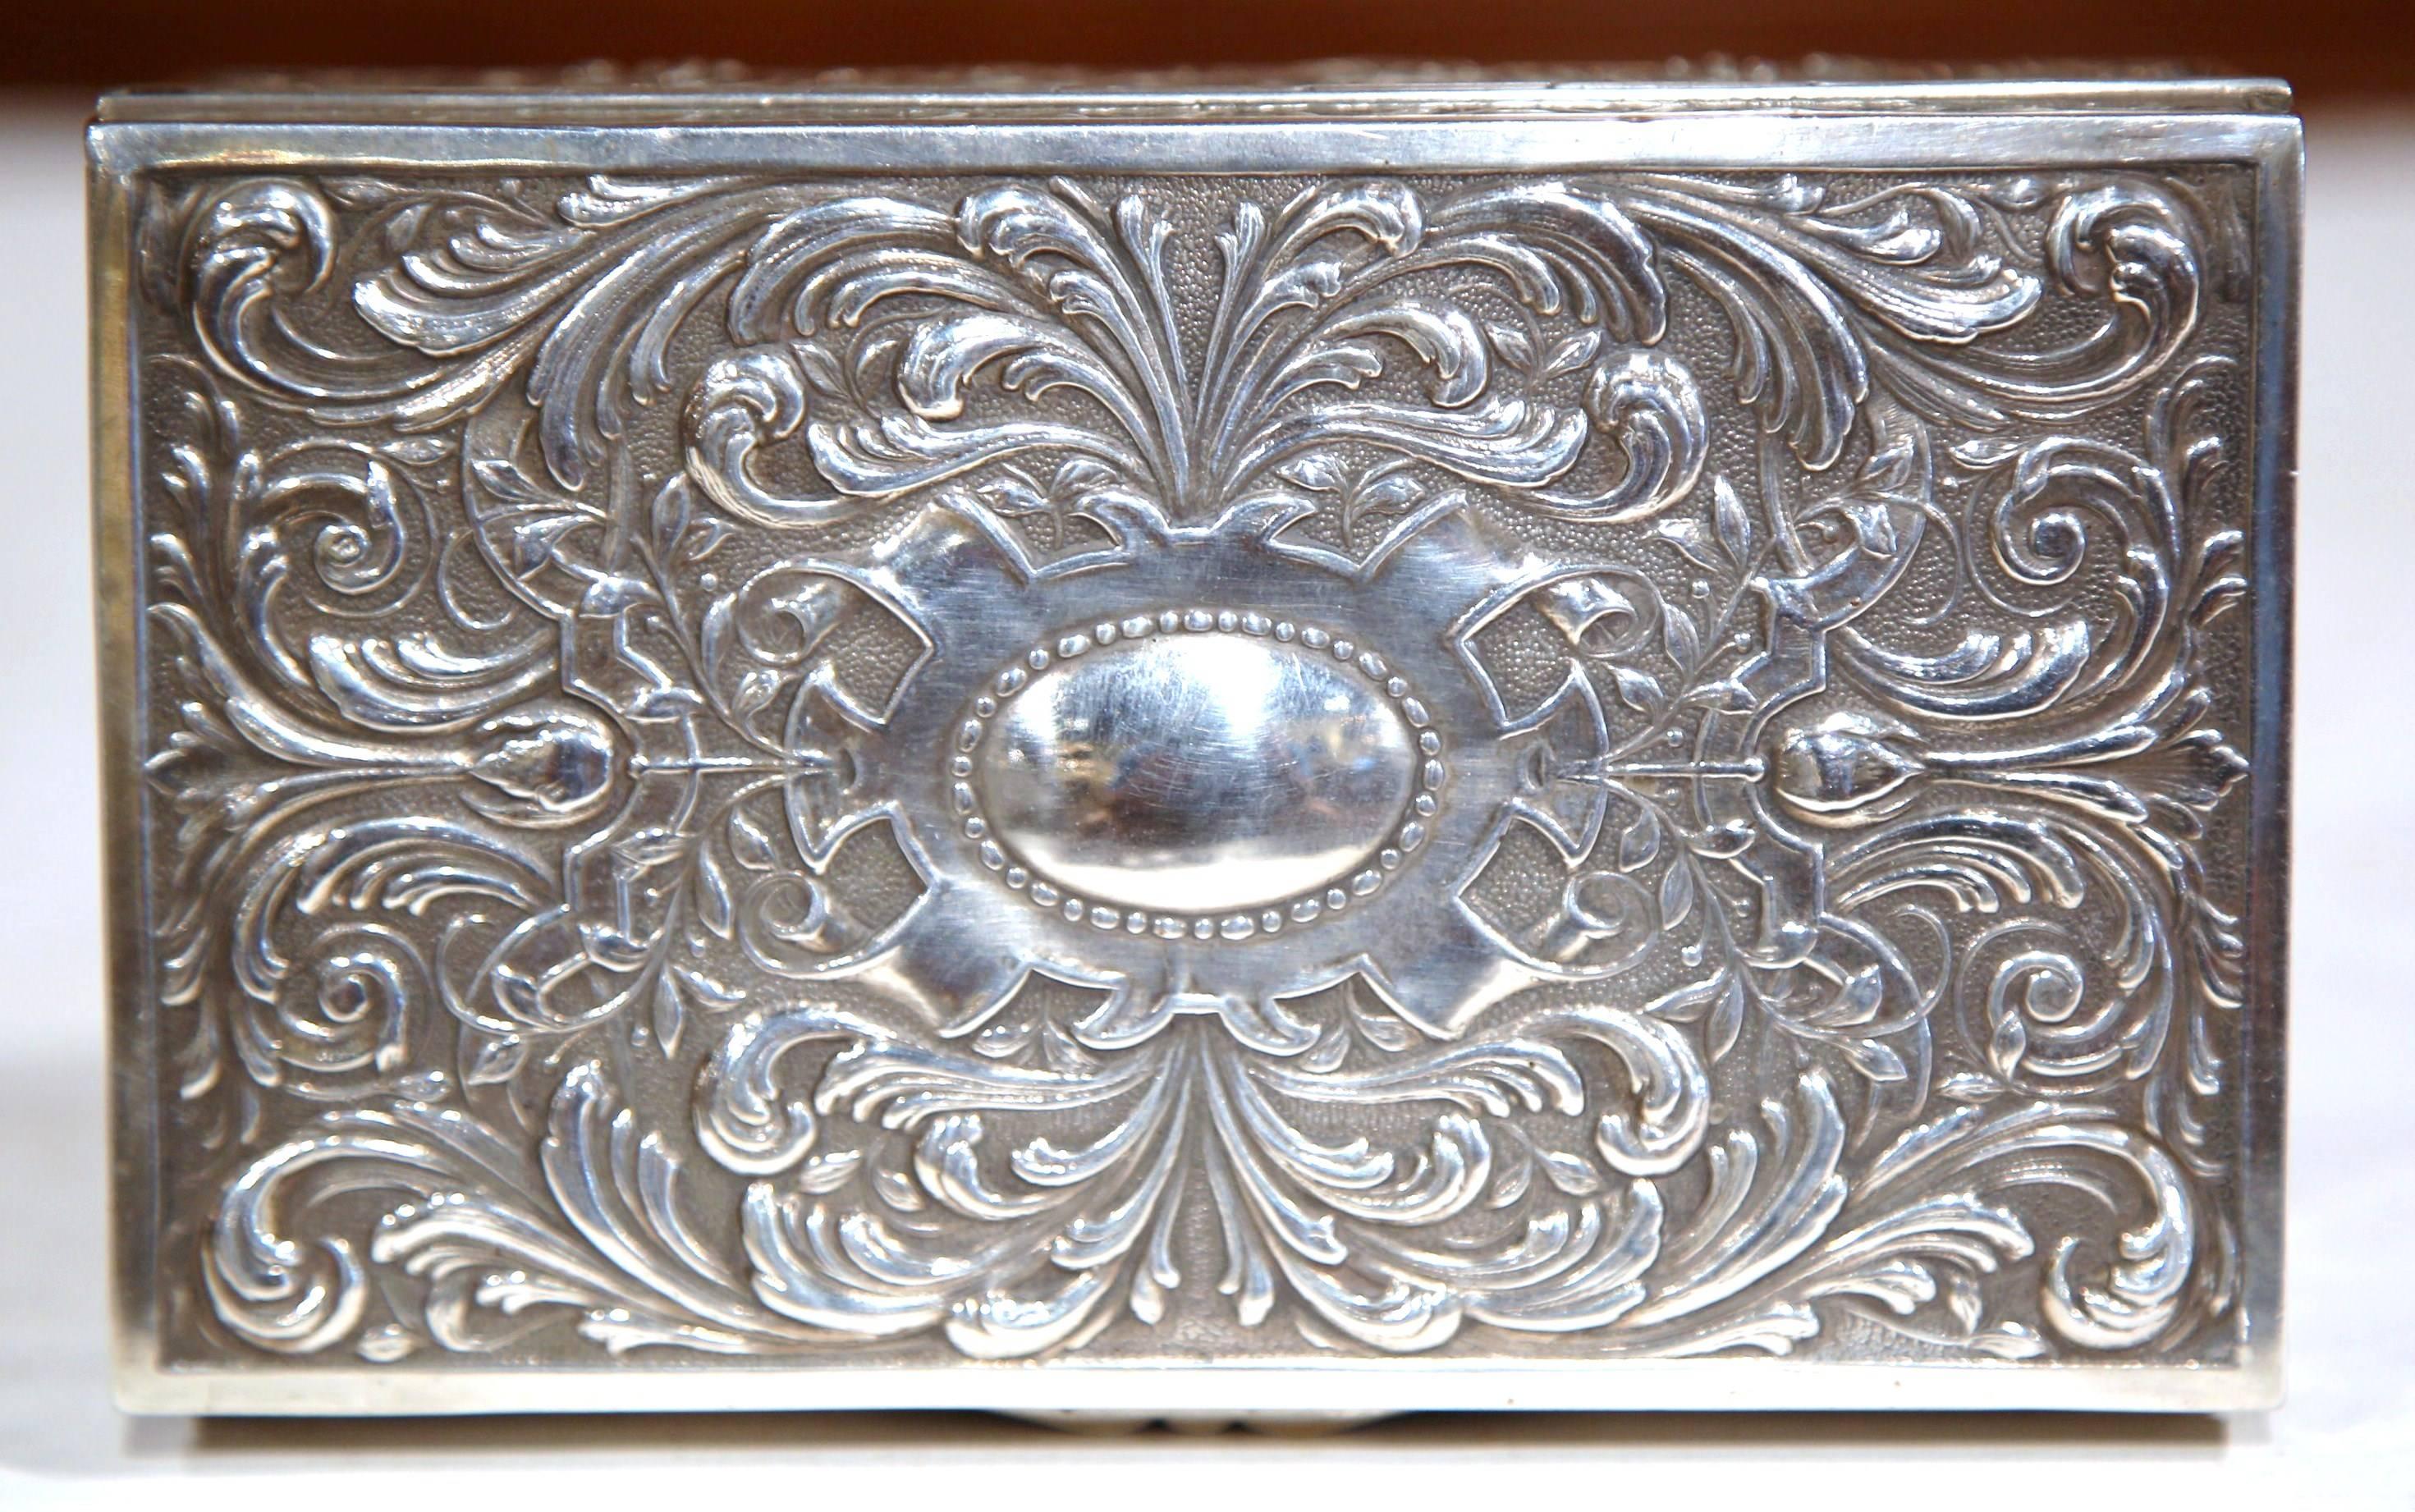 Hand-Crafted 19th Century French Wooden Repousse Silver Plated Jewelry Box